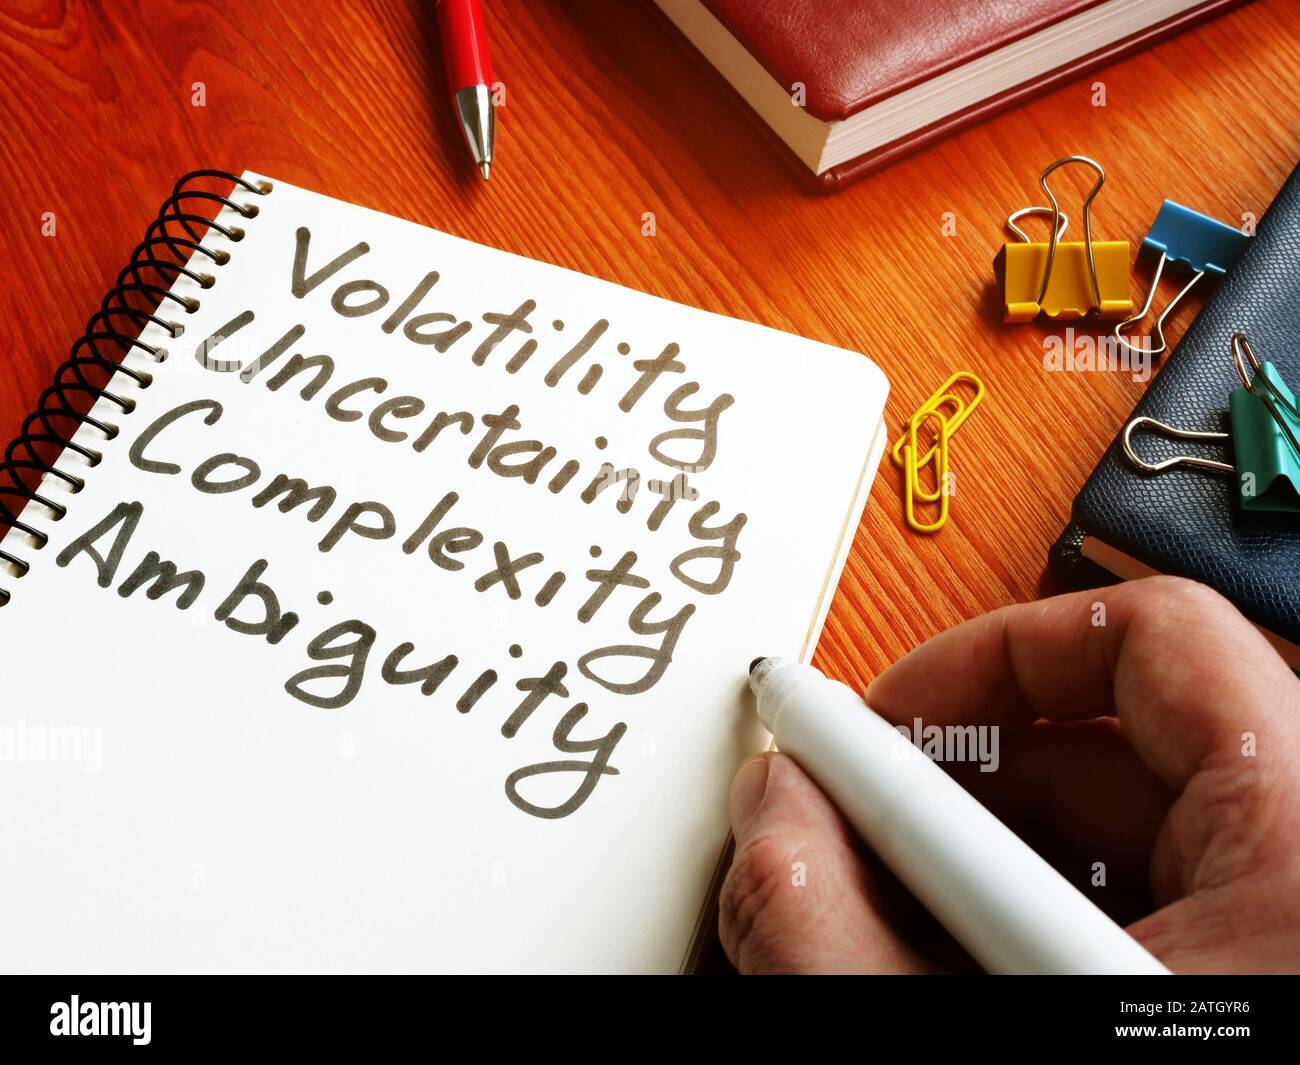 VUCA - Volatility, Uncertainty, Complexity, Ambiguity inscriptions in the note. Stock Photo